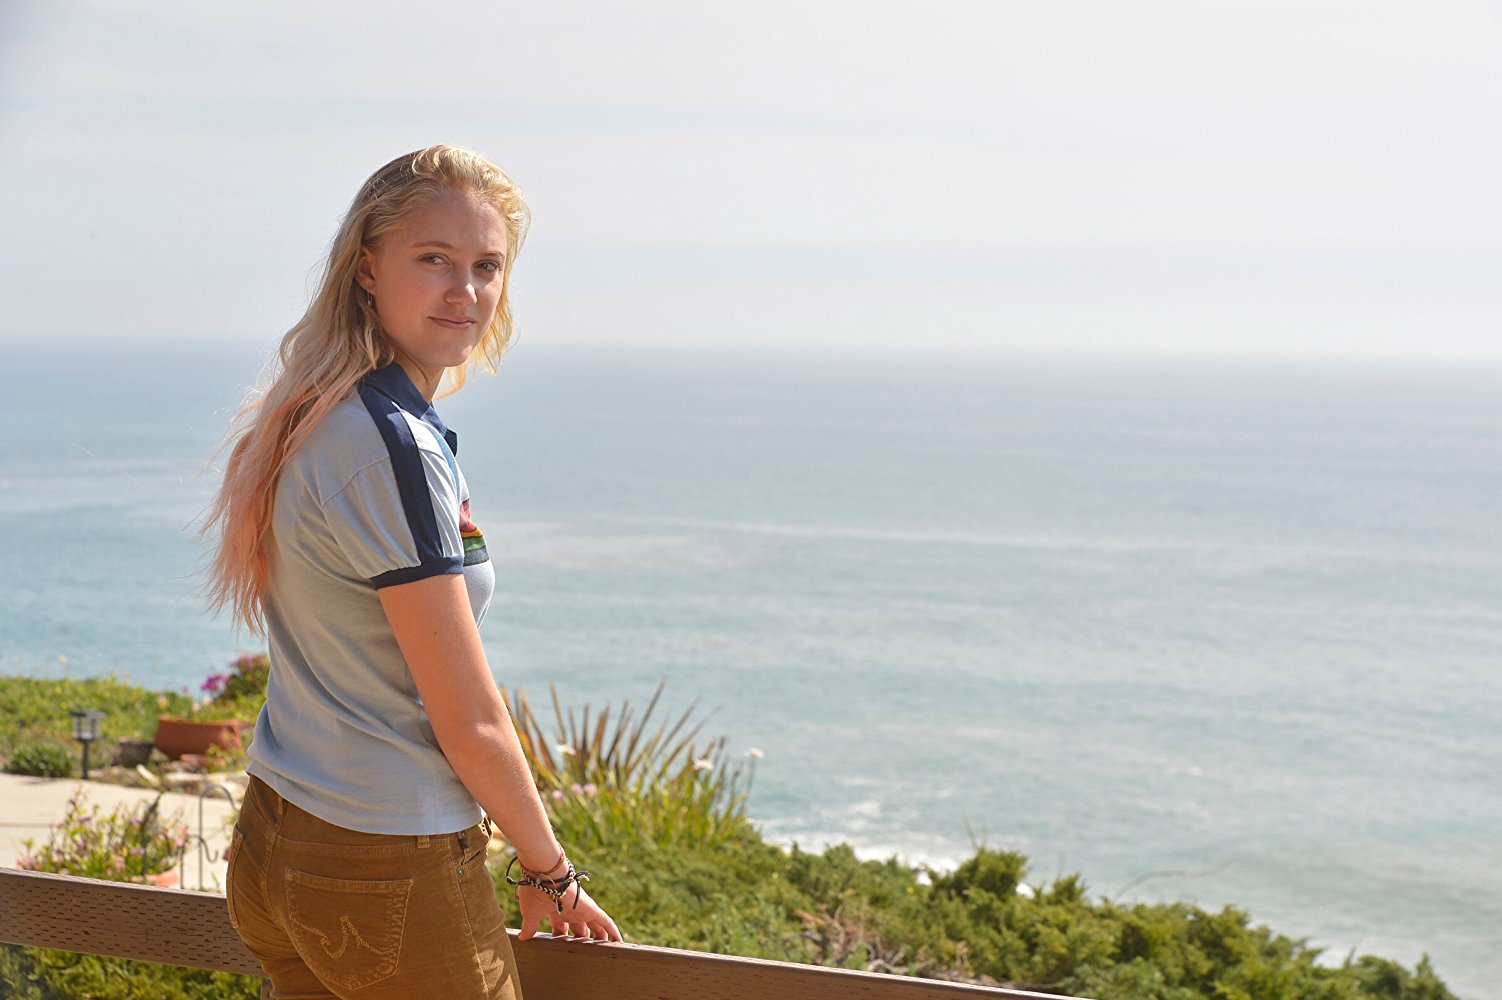 Maika Monroe in "The Tribes of Palos Verdes"